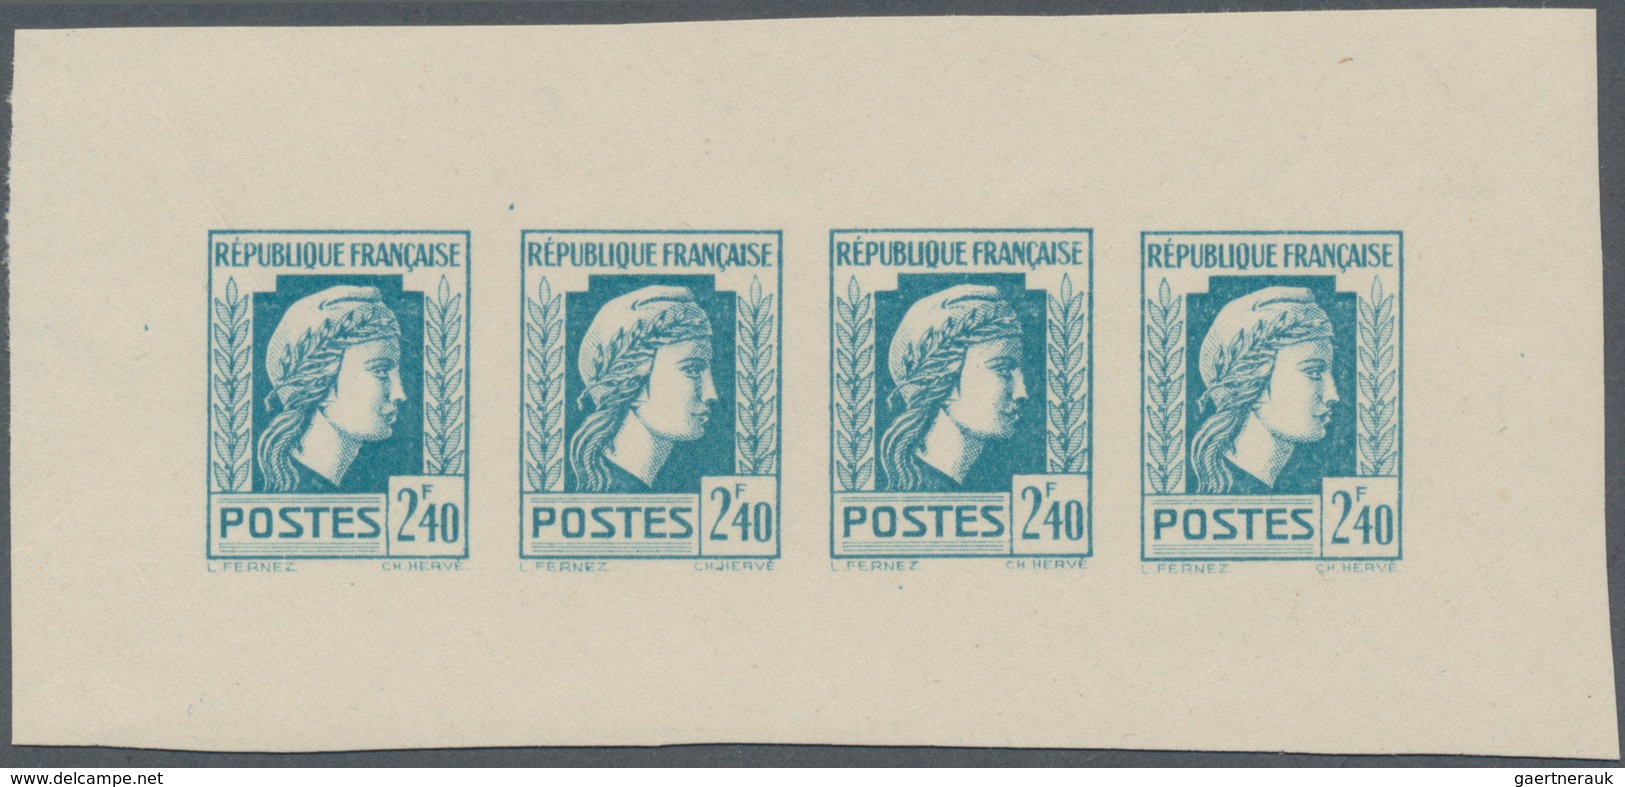 Frankreich: 1944, Definitives "Marianne", Not Issued, 2.40fr., Group Of Five Imperforated Panes Of F - Ungebraucht